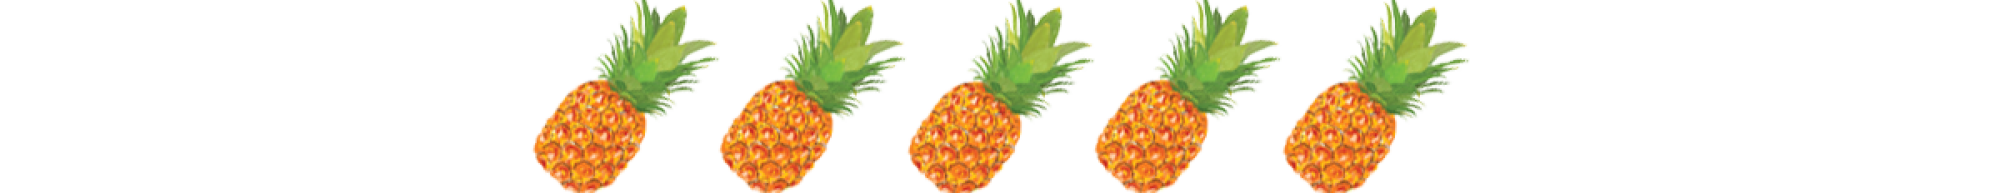 An illustration of pineapples